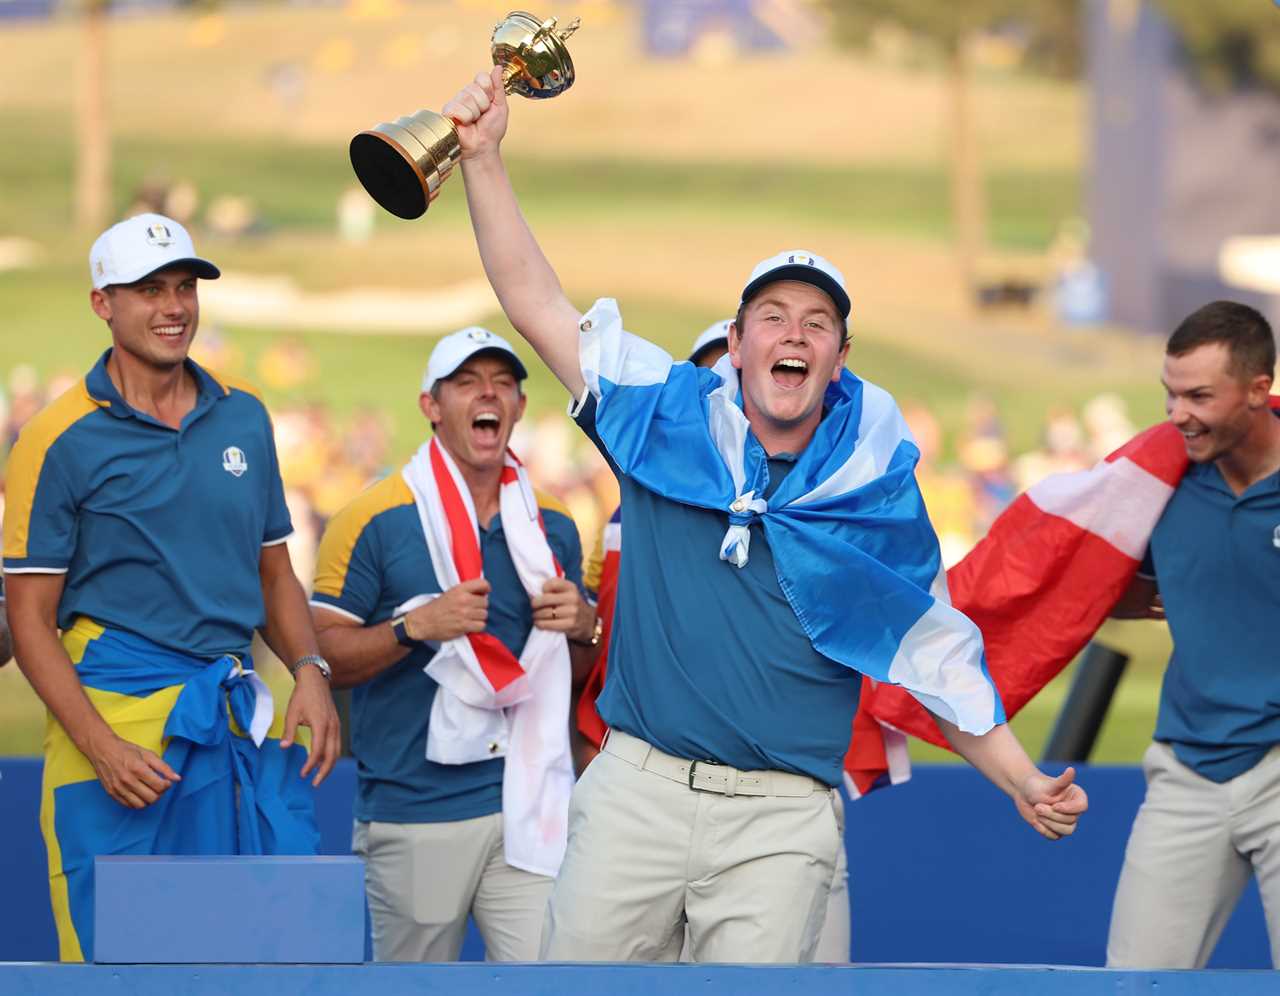 Ryder Cup 2023 Marco Simone Golf & Country Club, Rome, Italy 01.10.2023 Pic Richard Pelham. Team Europe win Ryder Cup Robert MacIntyre (sco) of Team Europe